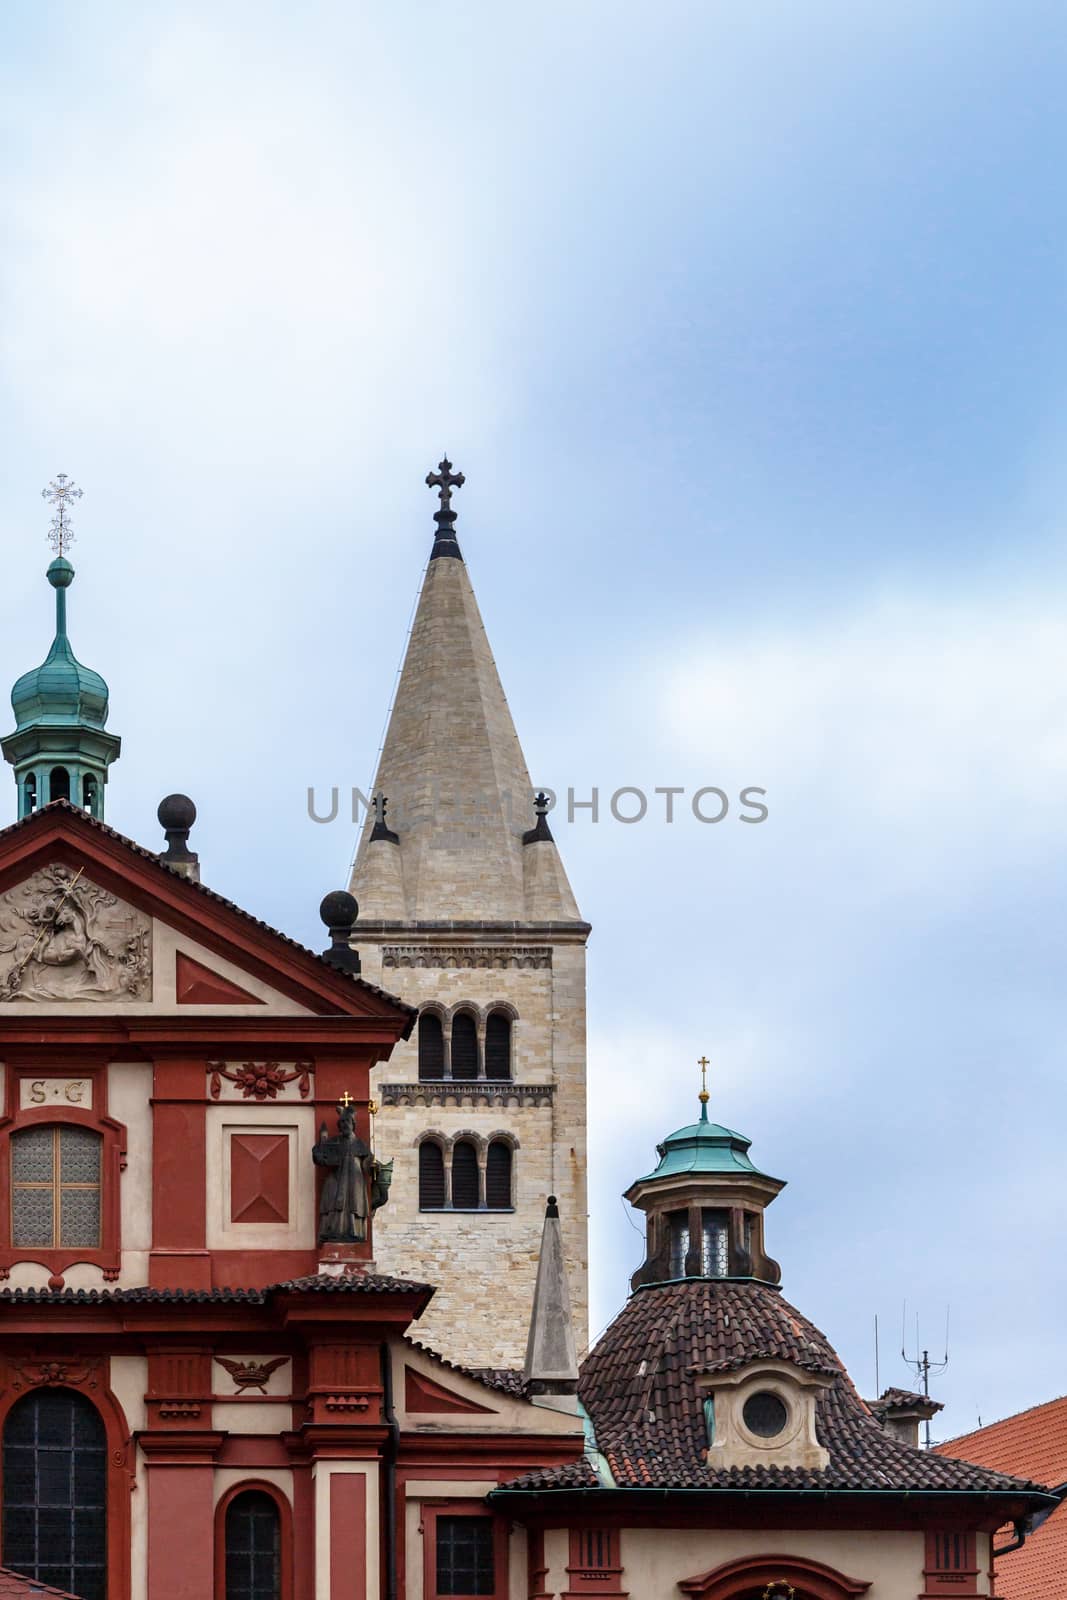 Front view of St George Basilica, the oldest living church built within Prag Castle, on cloudy sky background.